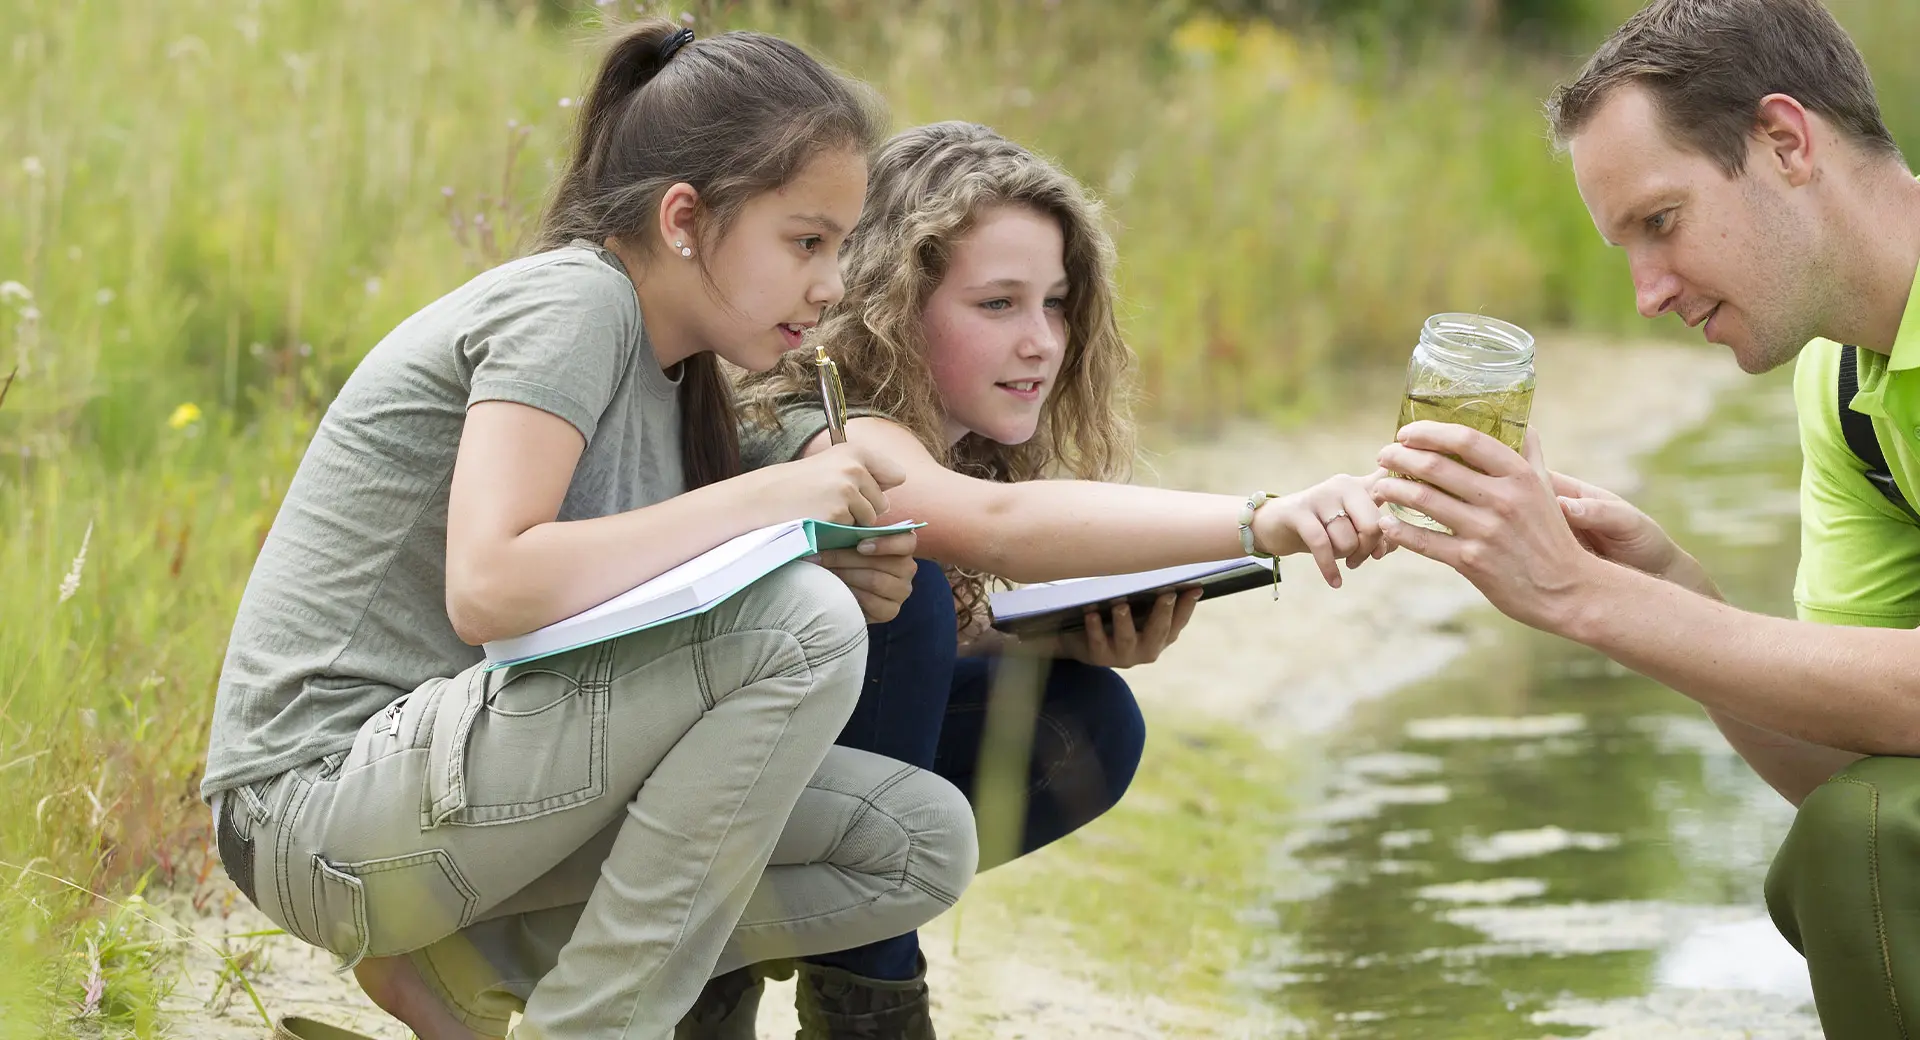 At the edge of a pond, two children and an adult inspect a jar full of pond life